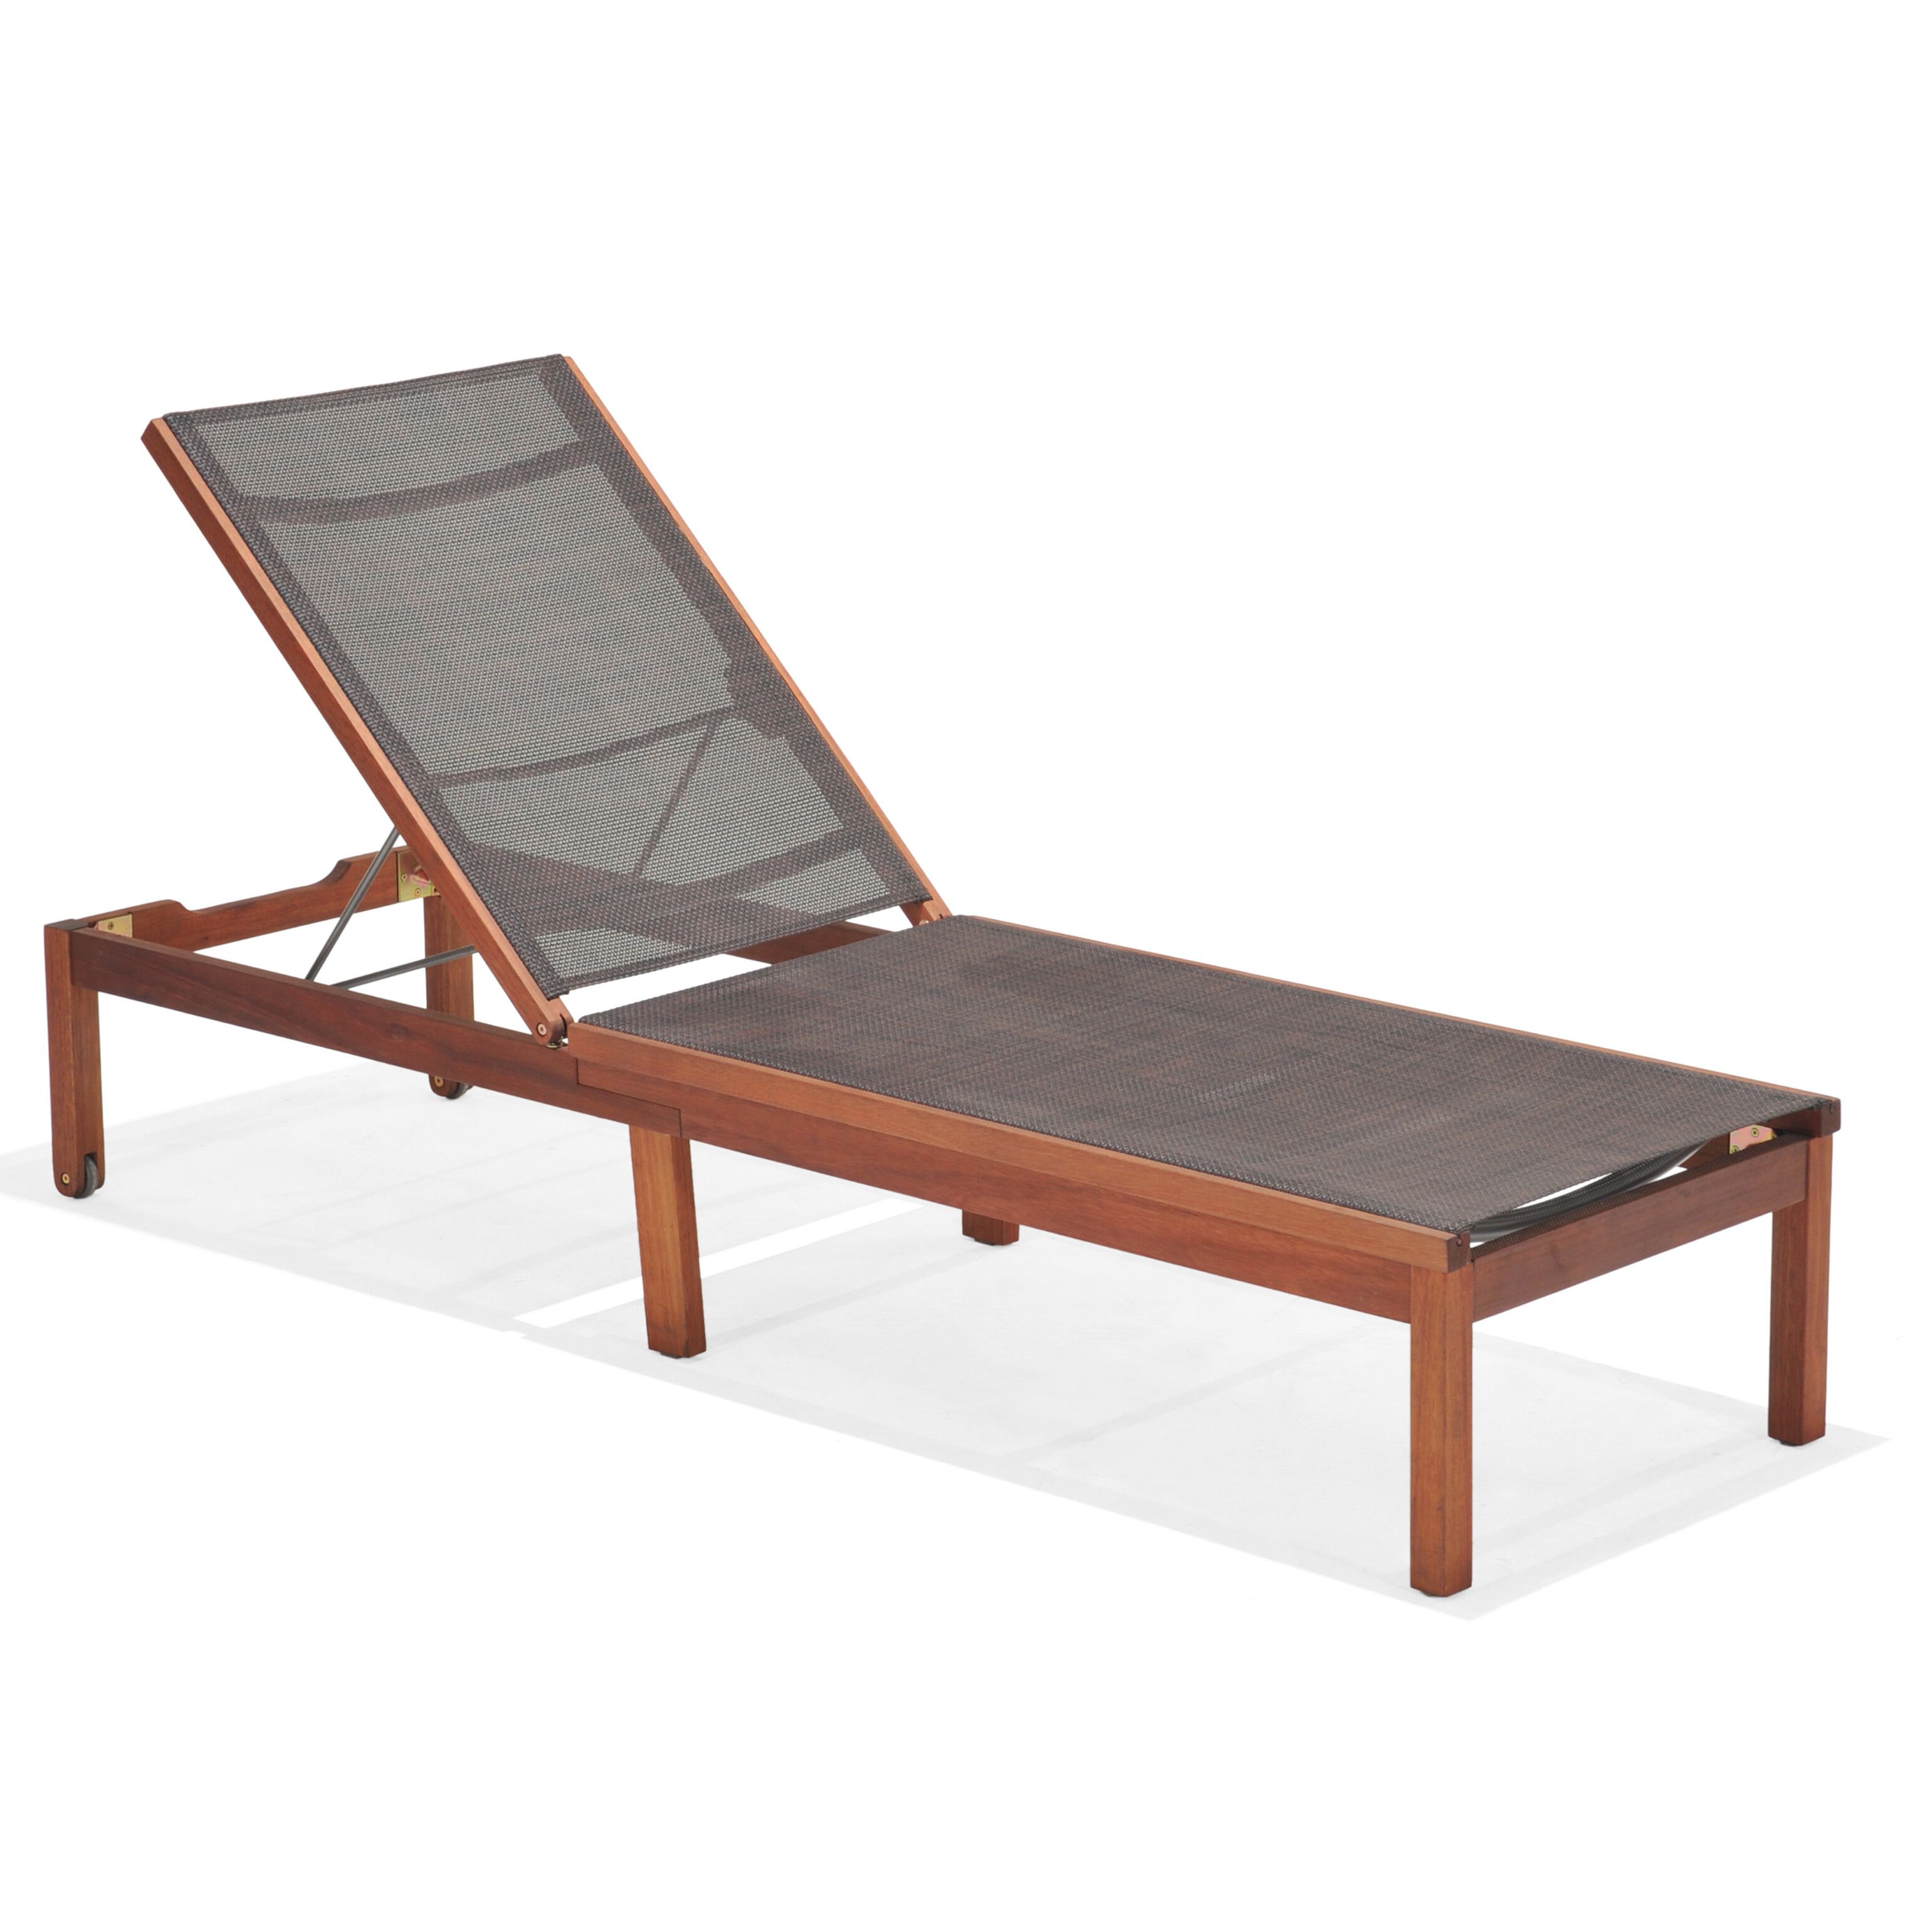 Well Known Eucalyptus Teak Finish Outdoor Chaise Loungers With Cushion Pertaining To Modern Eucalyptus Outdoor Chaises (View 16 of 25)